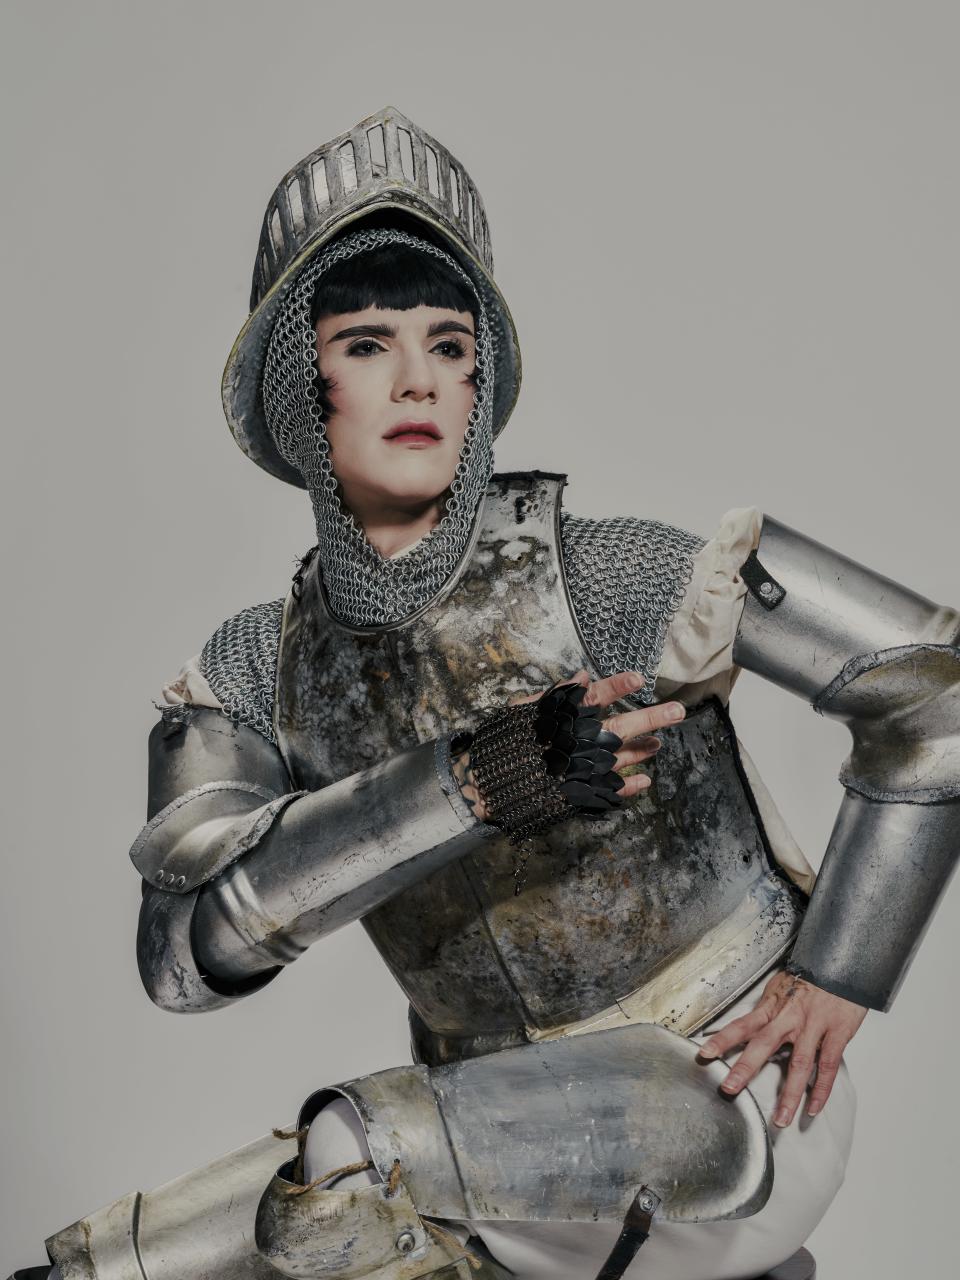 Sasha Velour pays tribute to Joan of Arc
Joan of Arc was a fifteenth-century French peasant who was put to death for dressing in men’s clothes, not just in battle but every day. Although Joan has been claimed as a symbol by everybody from the Catholic Church to French nationalists, she was executed for the core "crime" of "cross-dressing." In this sense, Joan of Arc’s refusal to stop wearing menswear is crucial for gender-nonconforming people. It’s one of the first (if not the first) widely documented instances of trans or non-binary gender expression in history...and its tragic ending resonates with people who still face violence today. Rather than the tragedy of death, we wanted to focus on Joan’s popularity and veneration, which according to scholars like Leslie Feinberg points to an even more ancient history of gender variance that Joan was tapping into, which has either been erased or was barely documented to begin with.